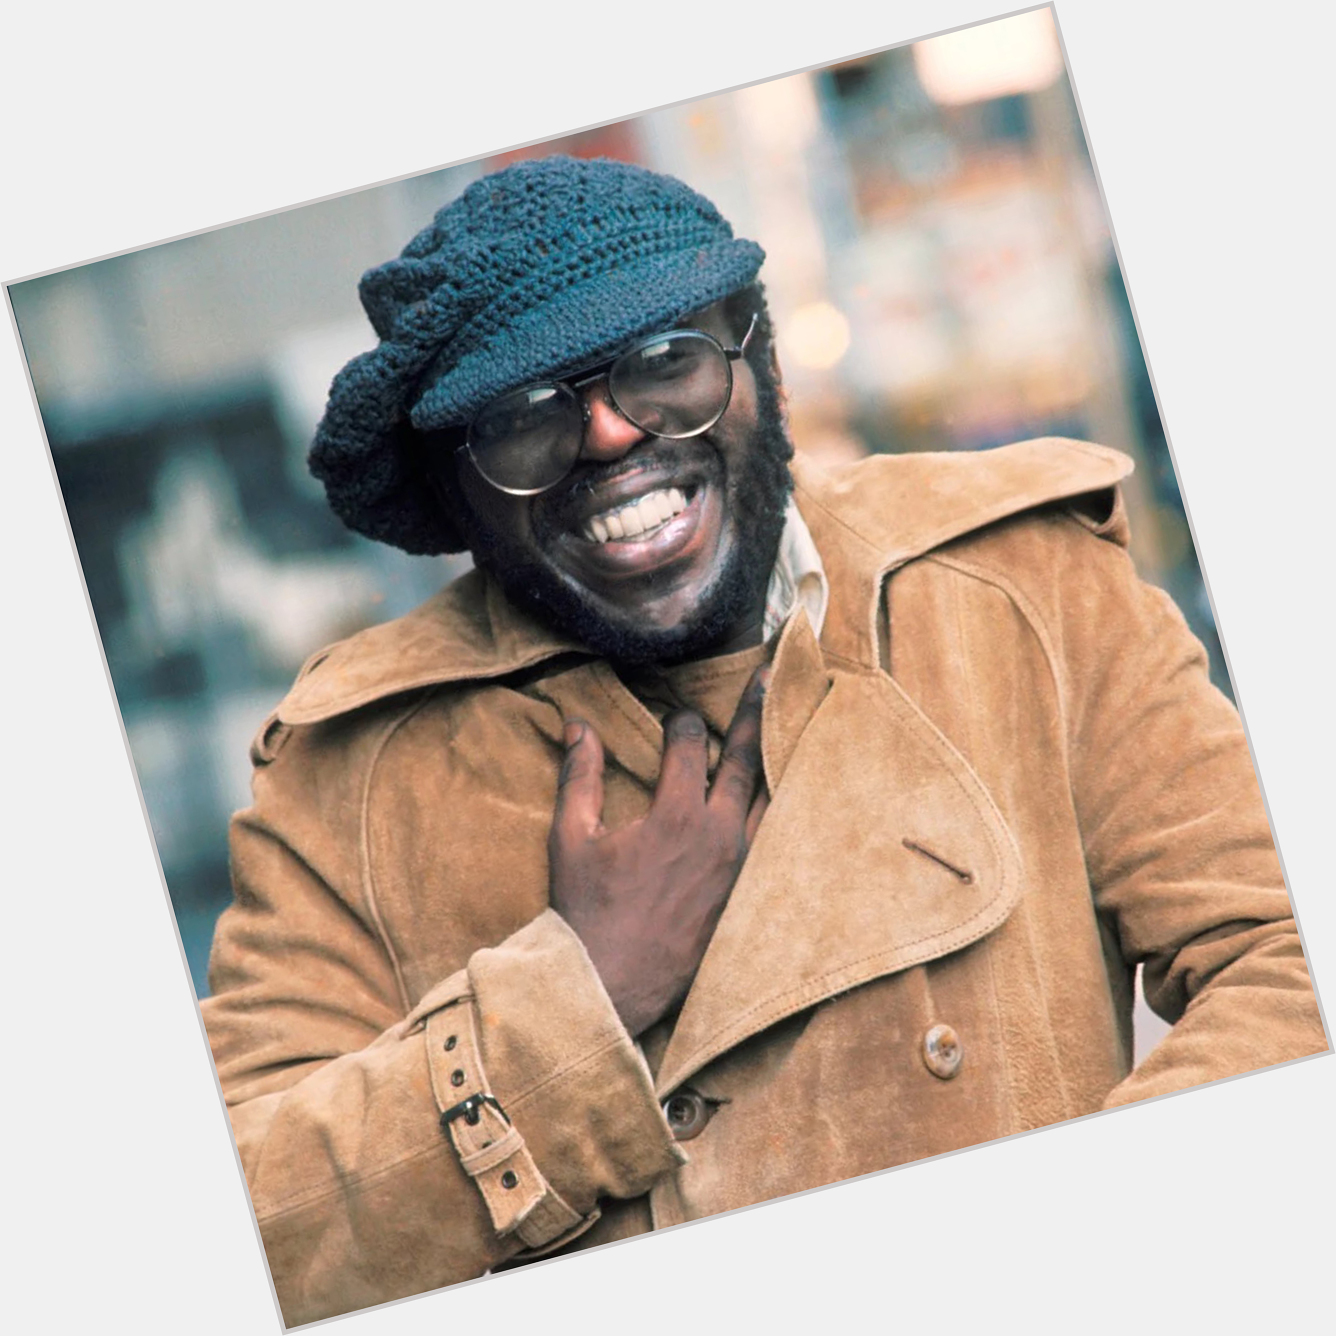 Happy Birthday to Curtis Mayfield, on what would have been his 79th birthday.  